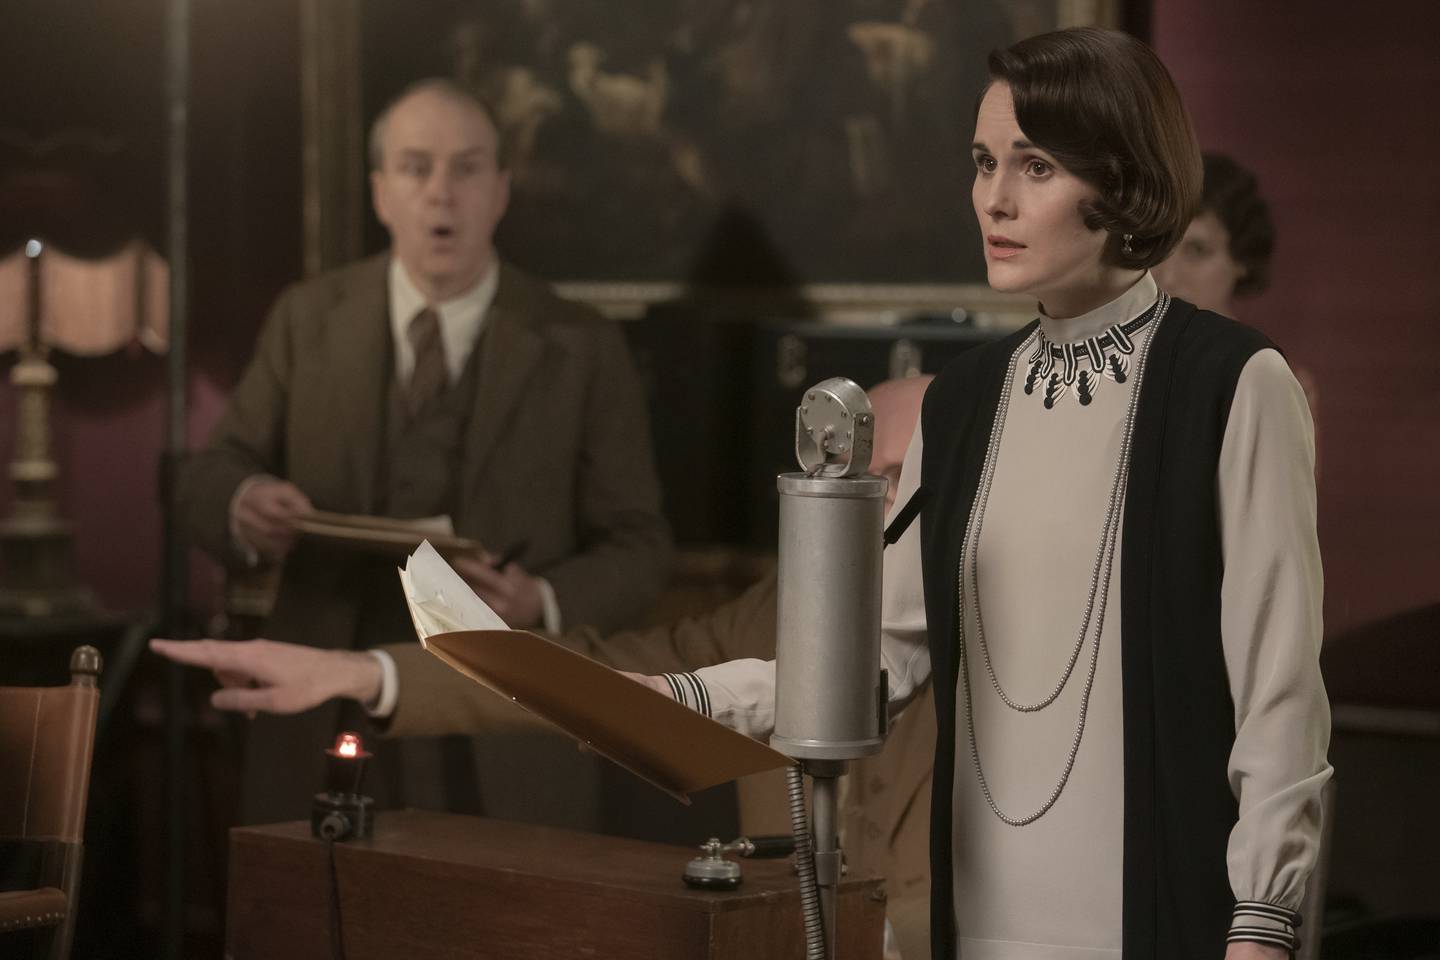 Michelle Dockery as Lady Mary in the film. Photo: Focus Features